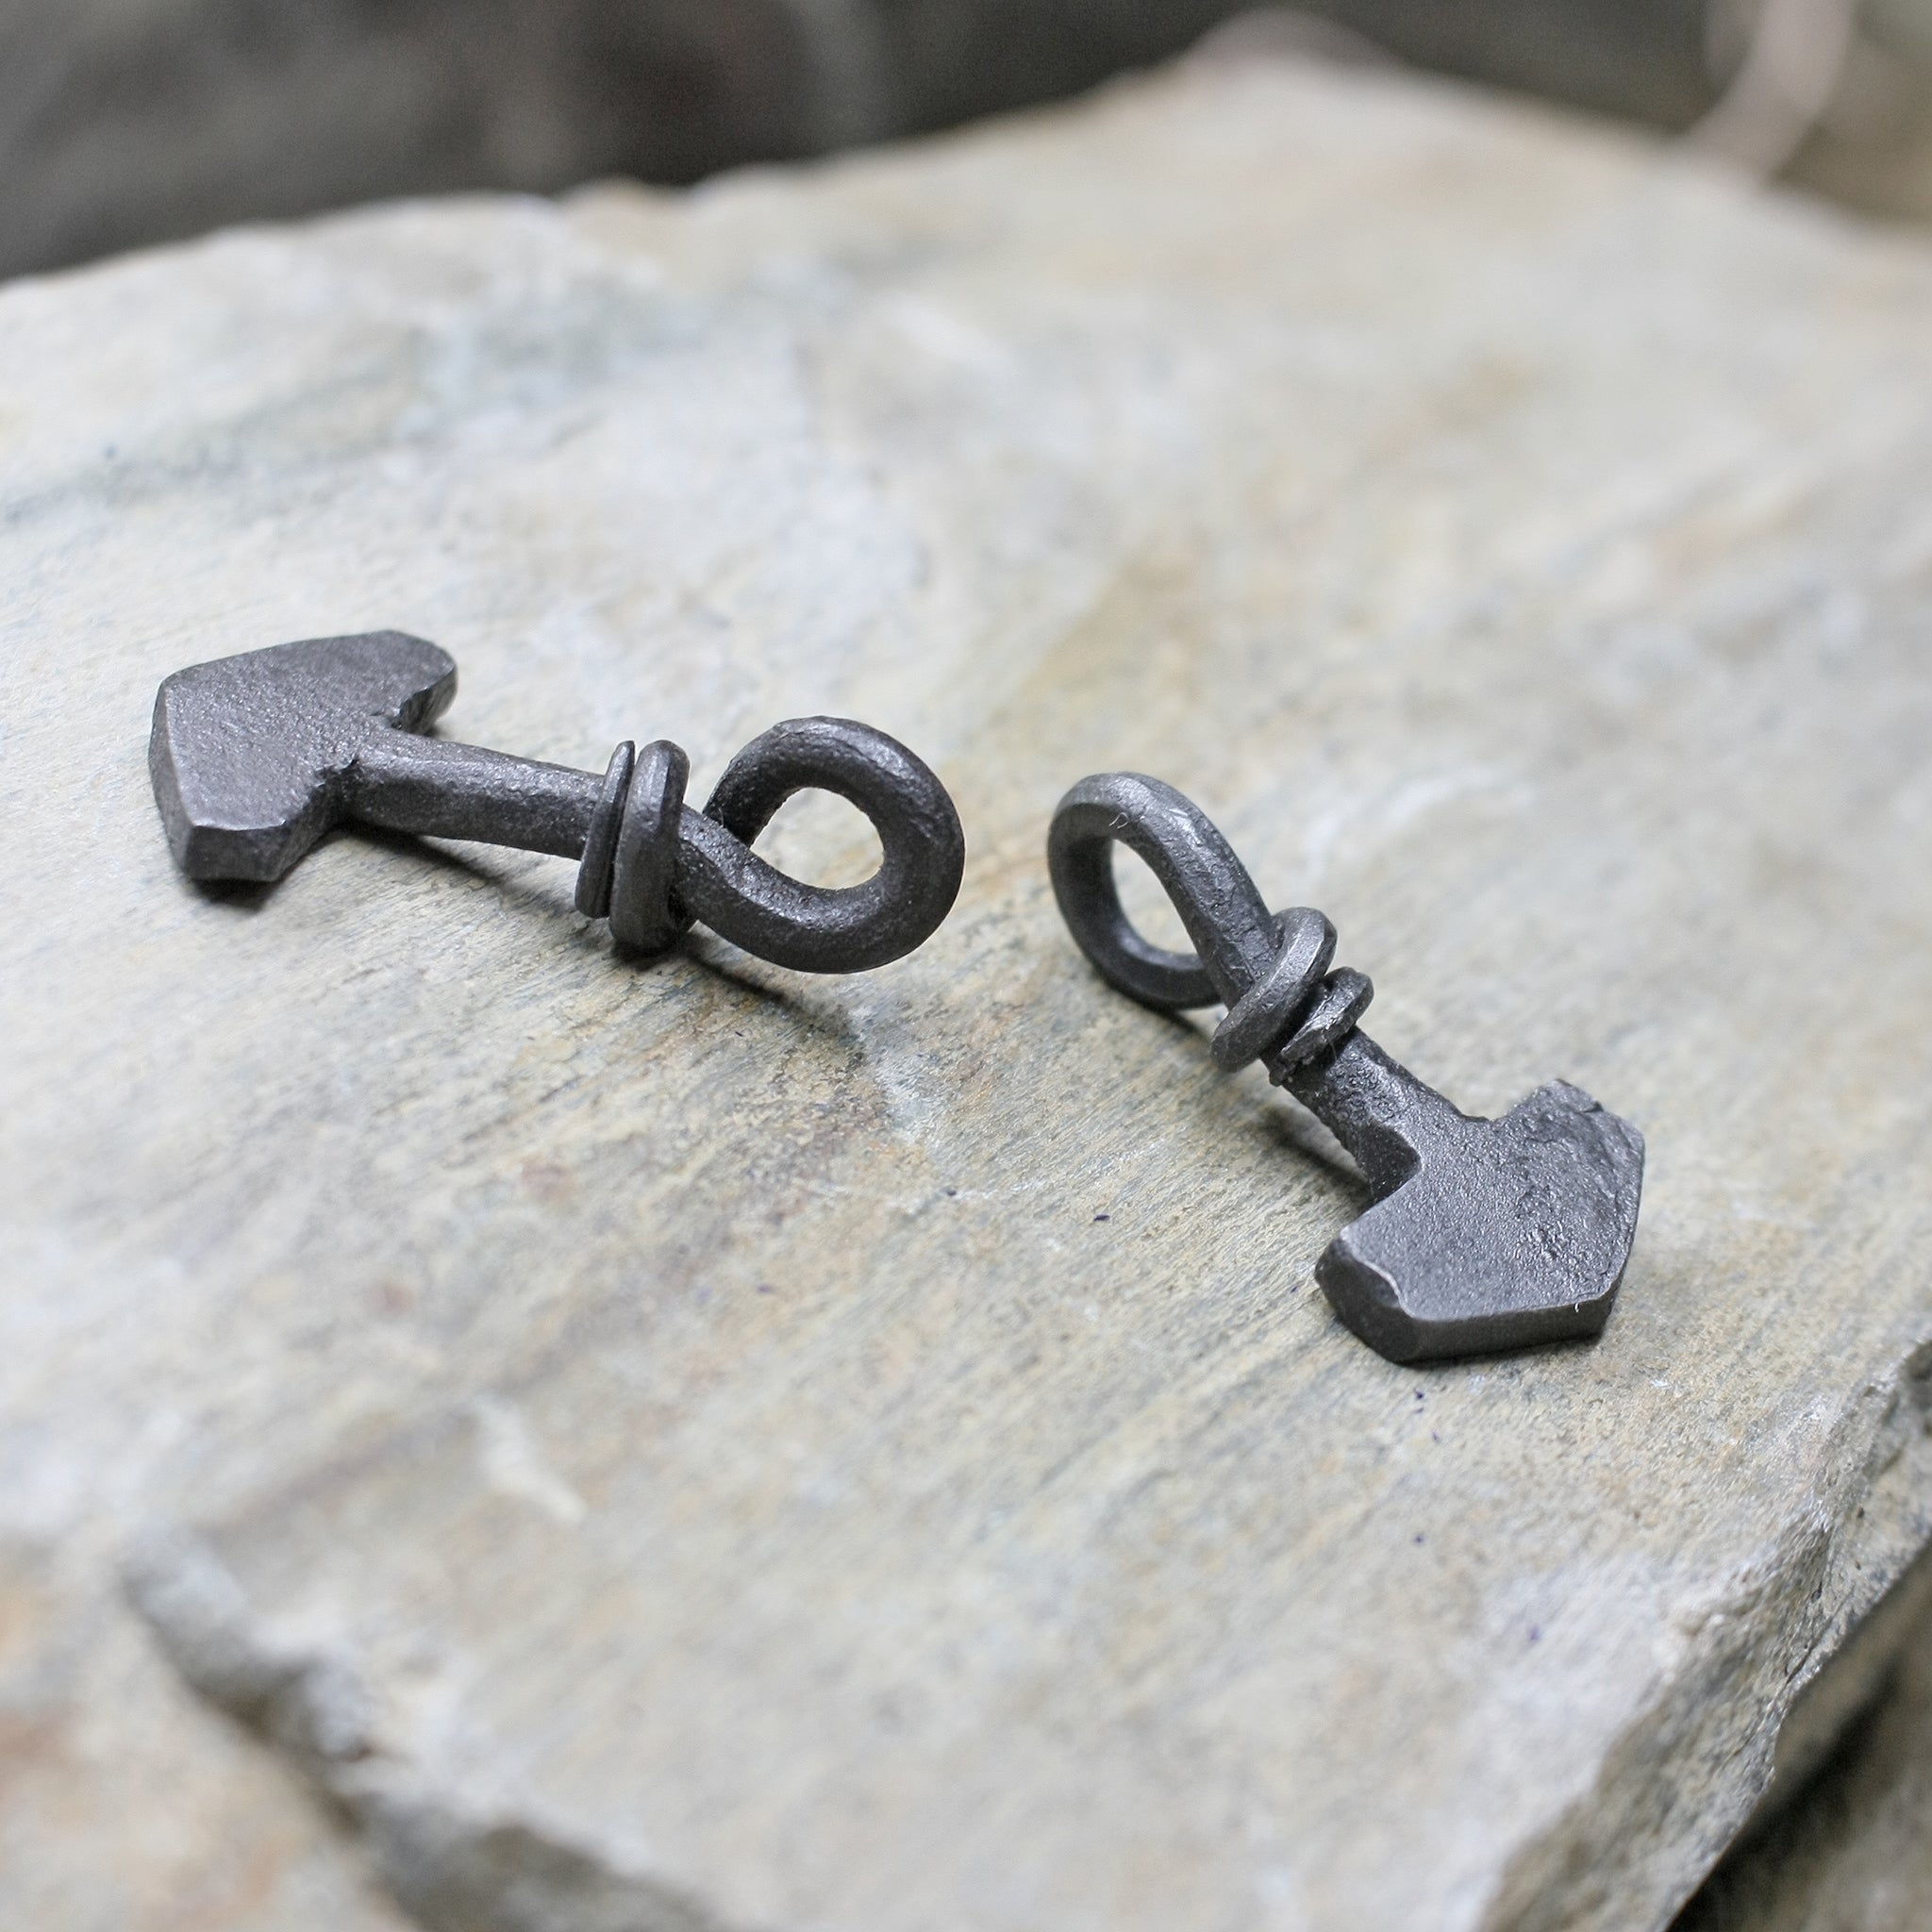 Small Iron Thors Hammer Pendants on Rock - Side View